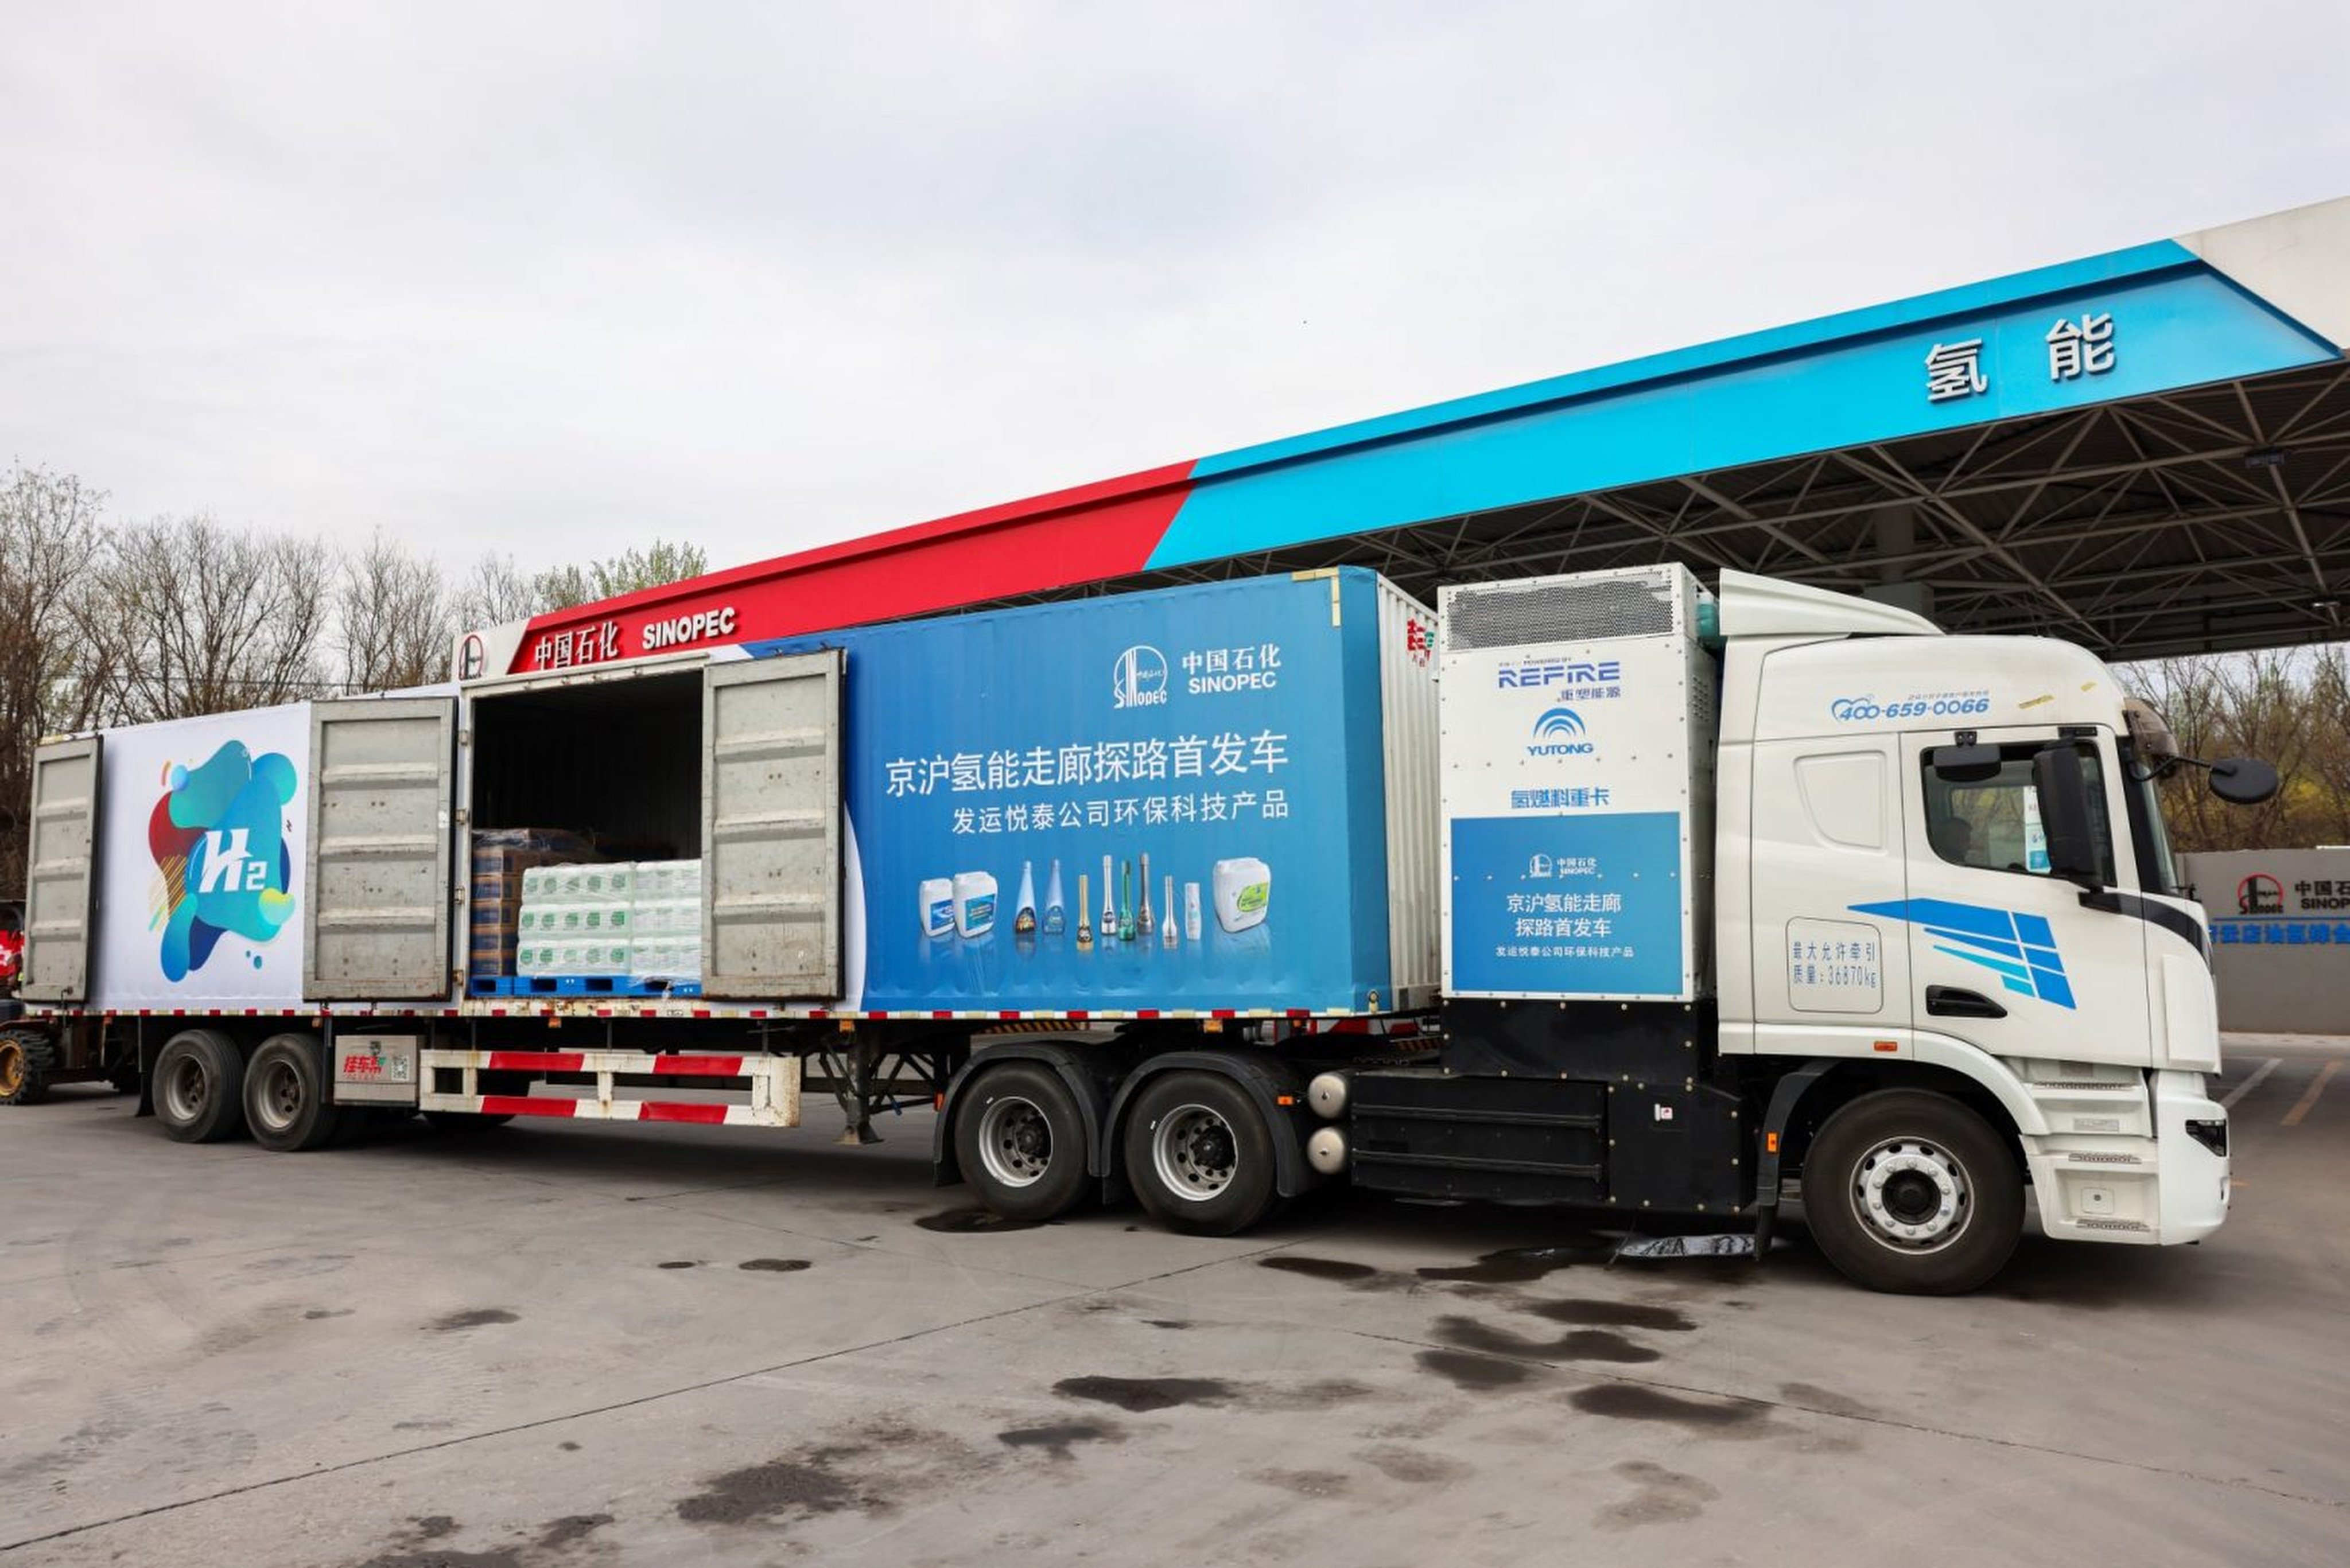 Hydrogen-powered trucks are expected to reach life-cycle cost parity with their fossil fuel-burning equivalents in China by 2027, driving the country to dominate the market for hydrogen fuel cells in the transport sector in the global hydrogen race. Photo: Refire Group